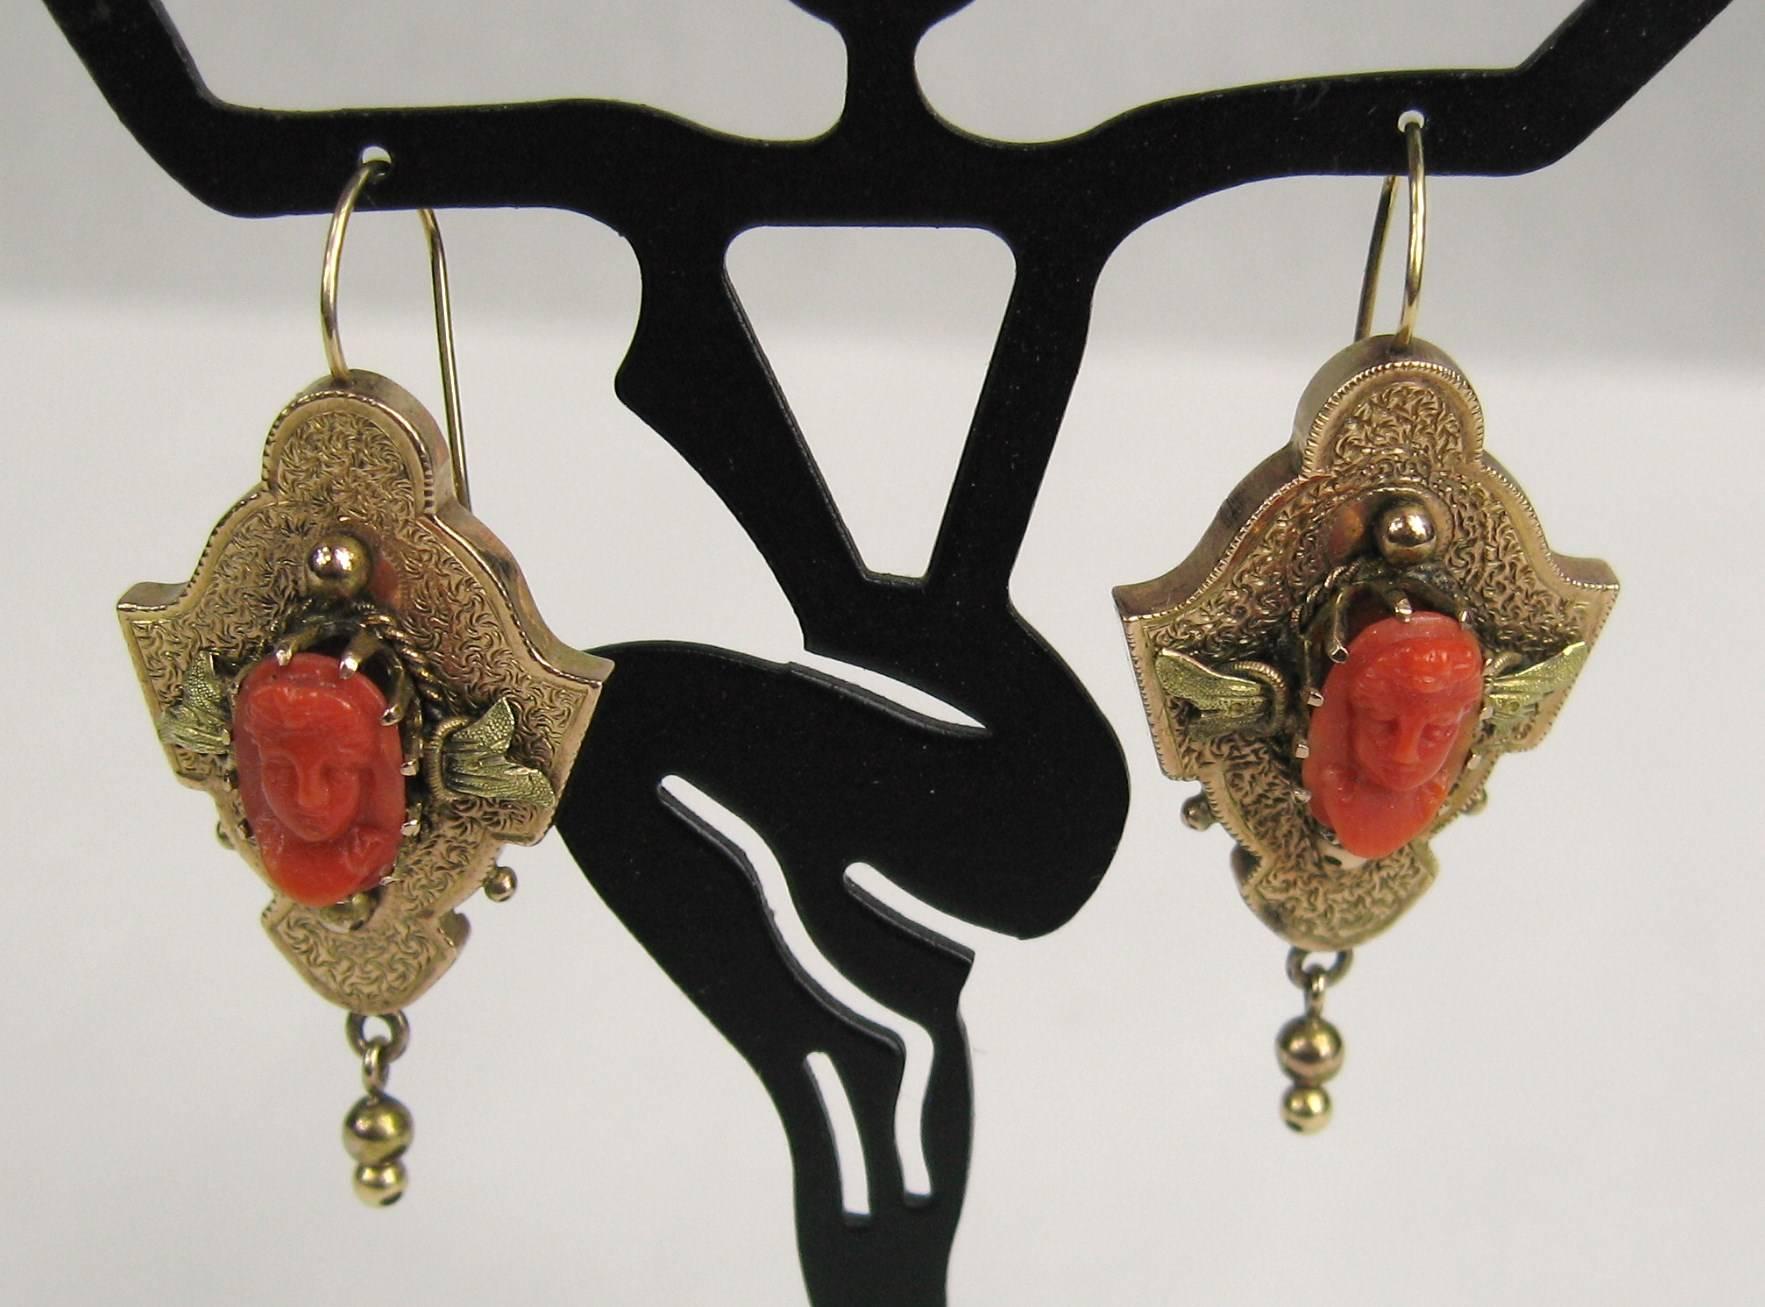 This is TRULY a Stunning pair of antique 14K Gold Yellow and Green Gold CORAL cameo Earrings. These are elaborate, with what looks to be a man on one earring and a woman on the other, great detailing in the coral carving. measuring 1.64 inches or